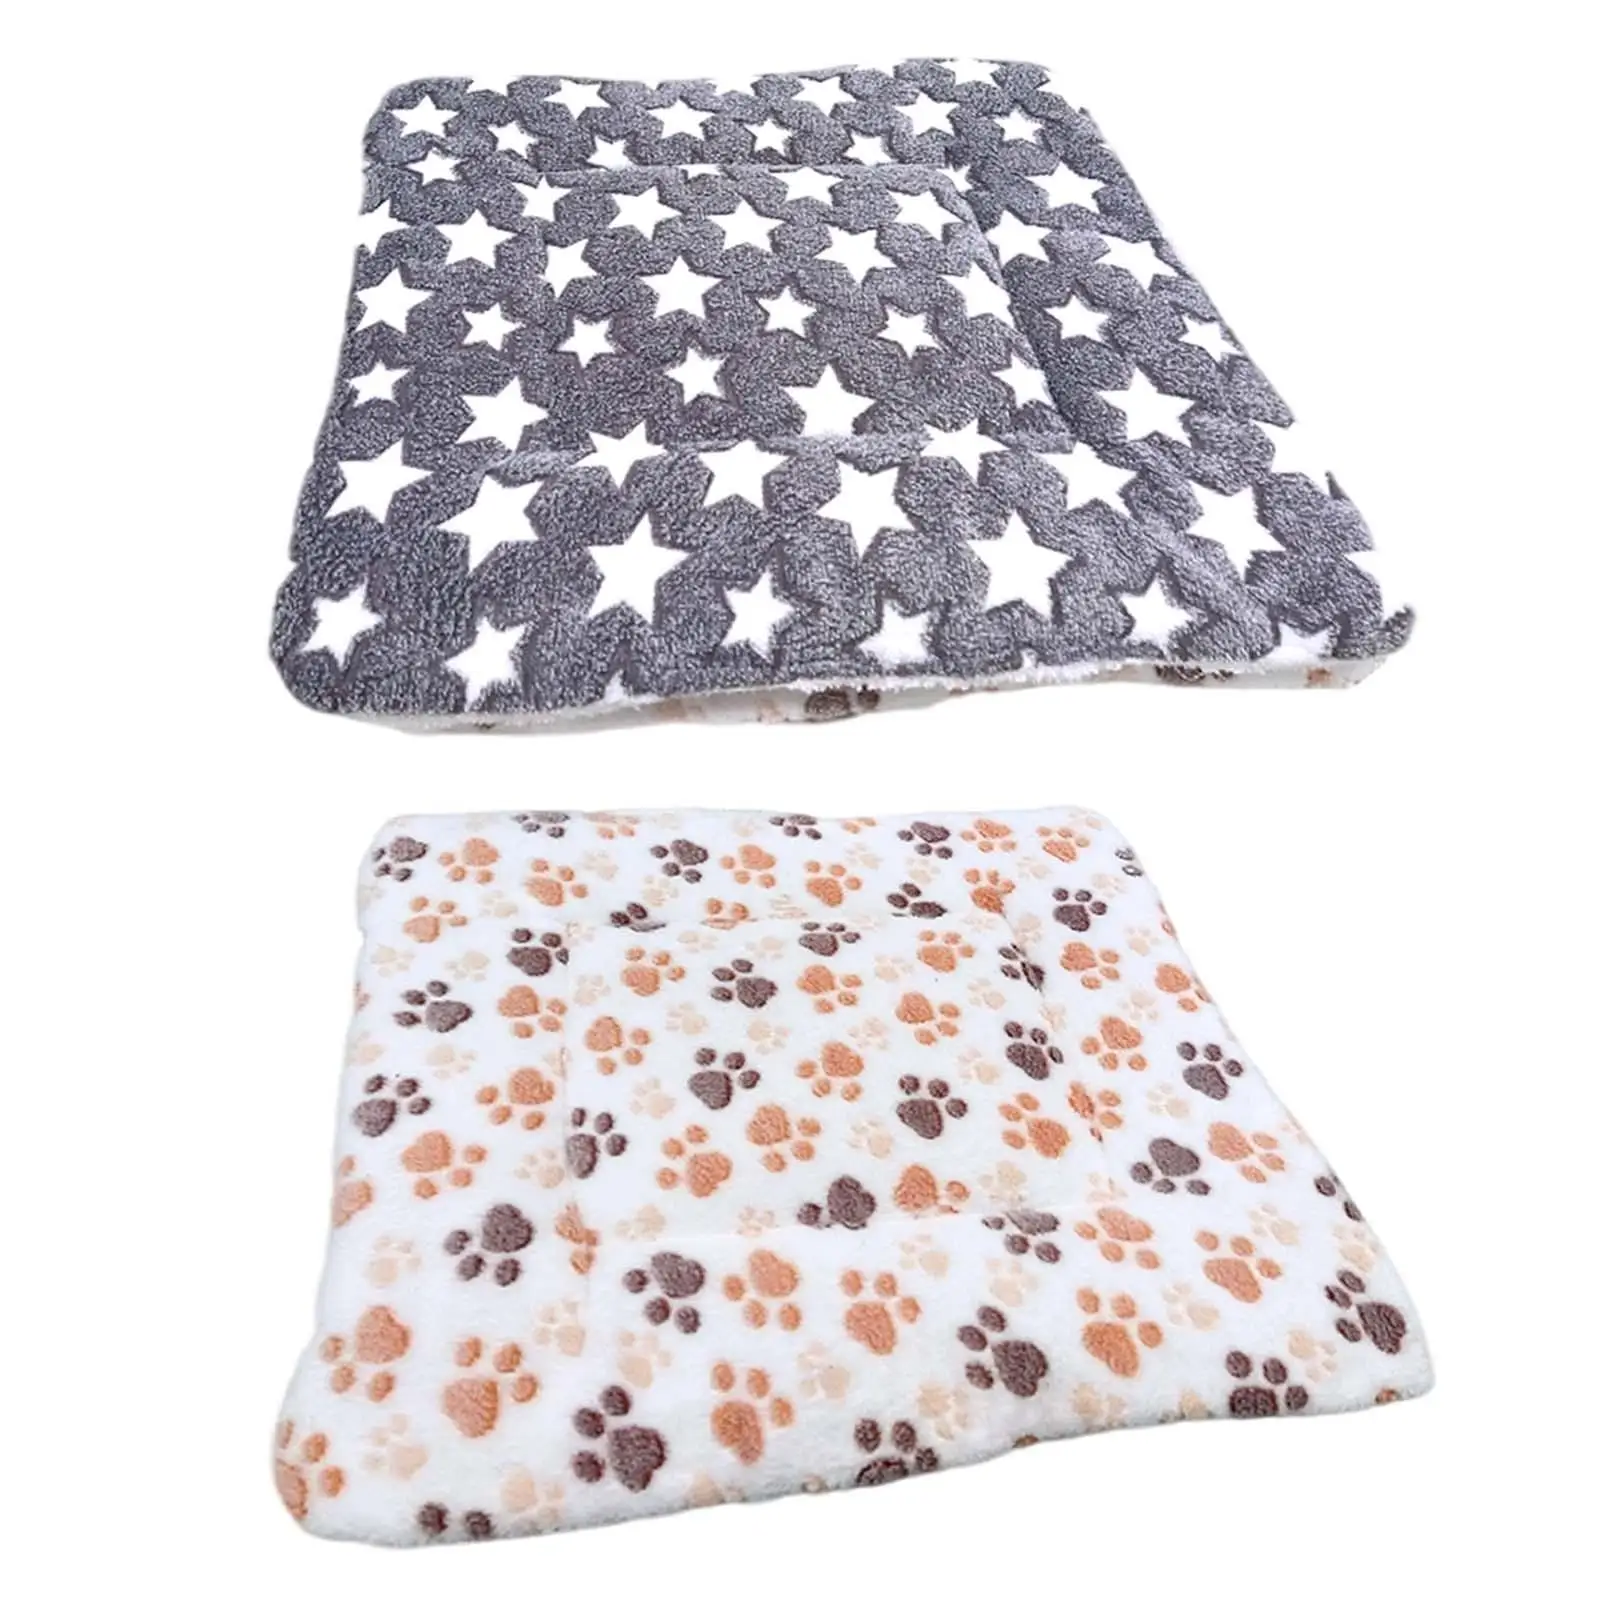 Soft Warm Pet Bed Mat Kennel Pad Pet Bed Liner Machine Washable Crate Mat with Cute Prints Pad for Medium Small Dogs and Cats